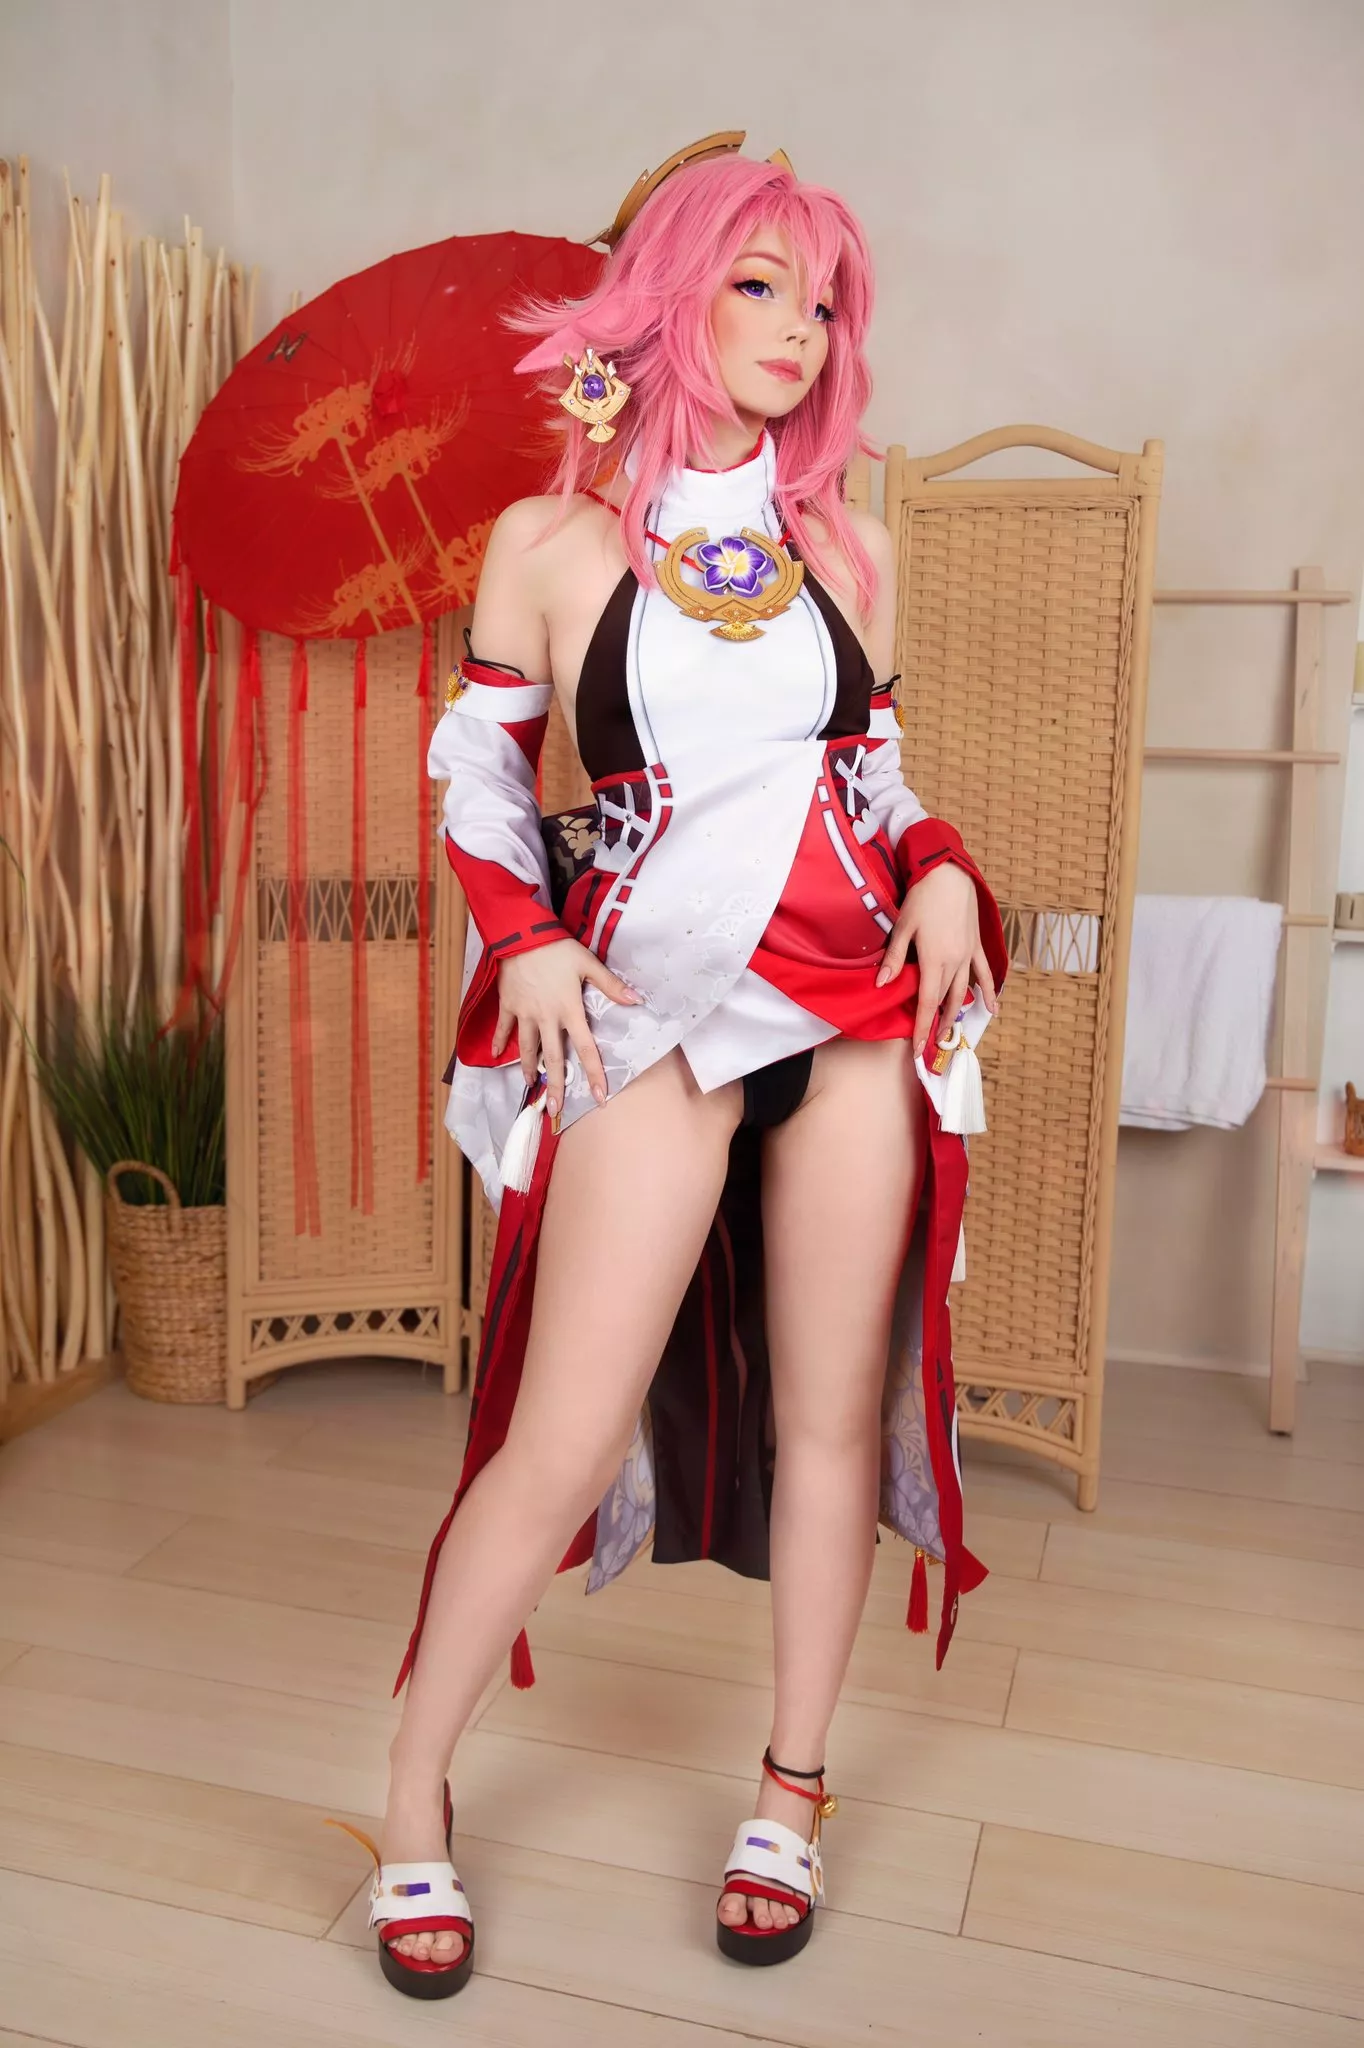 Yaemiko from genshin impact by caticornplay nude porn picture | Nudeporn.org